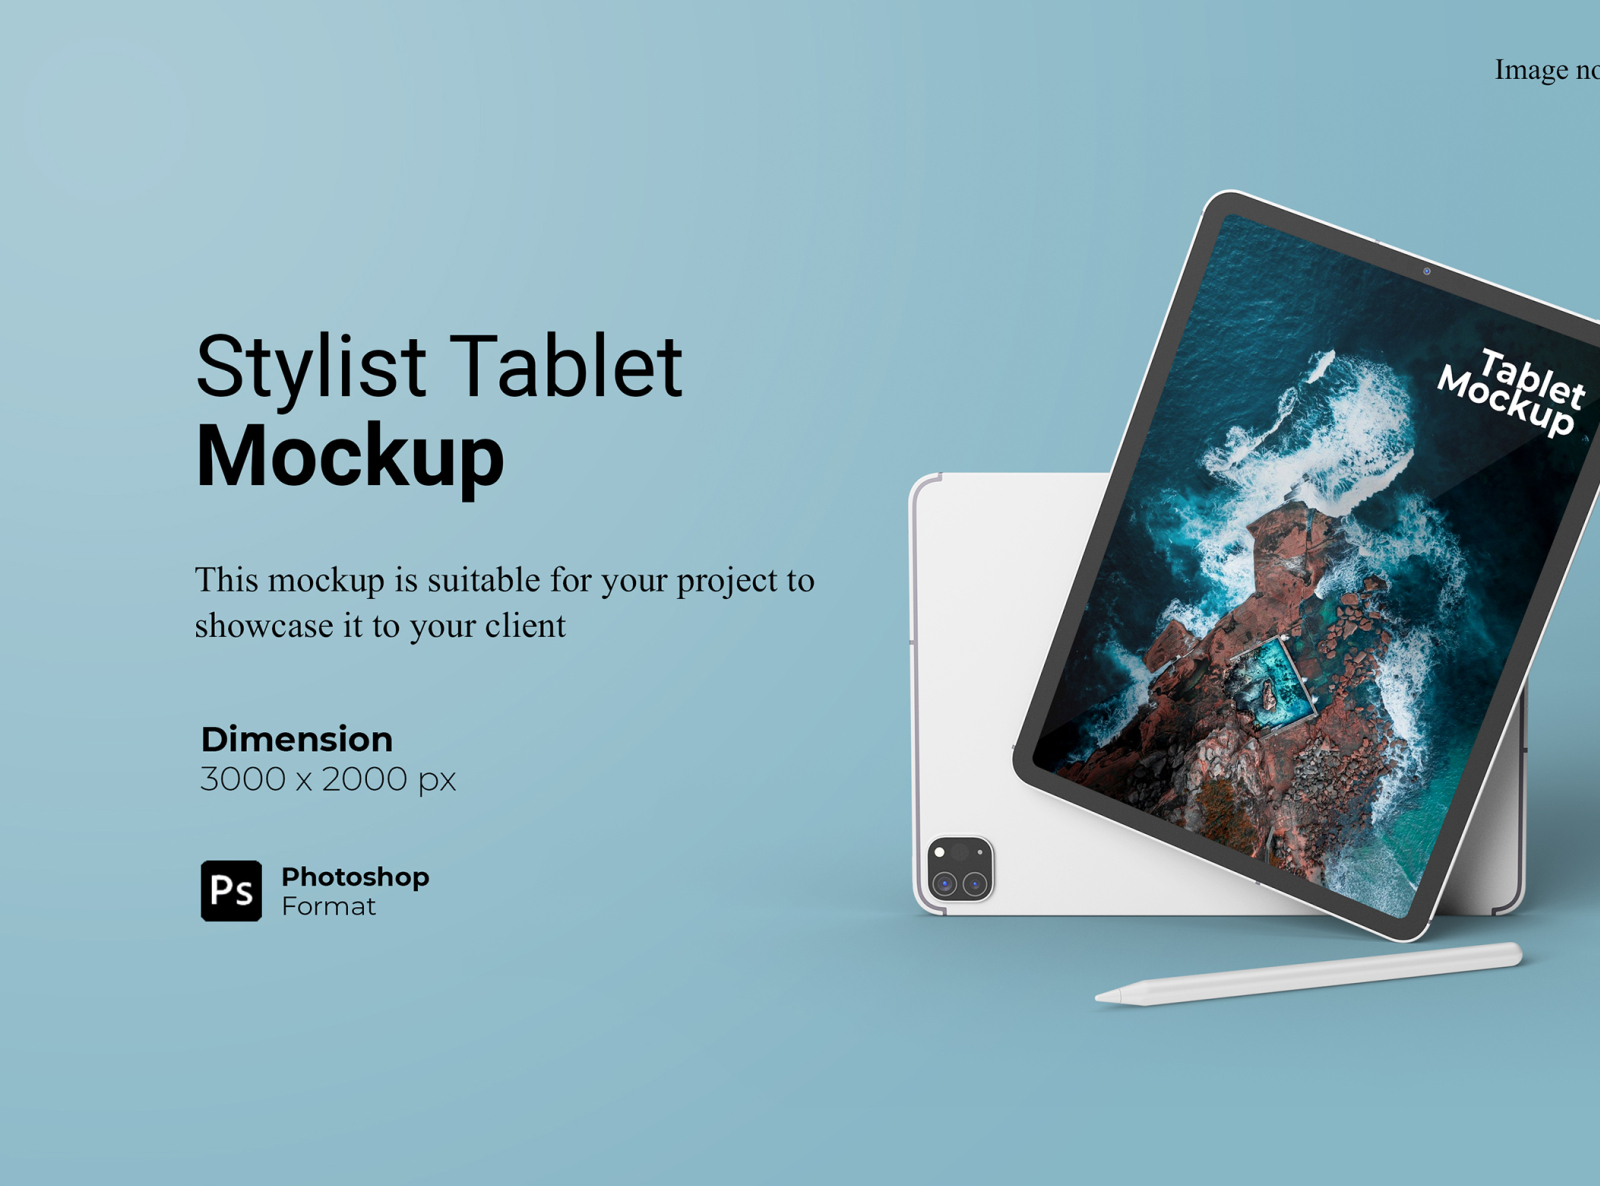 Stylist Tablet Mockup Template Cover by ianmikraz on Dribbble